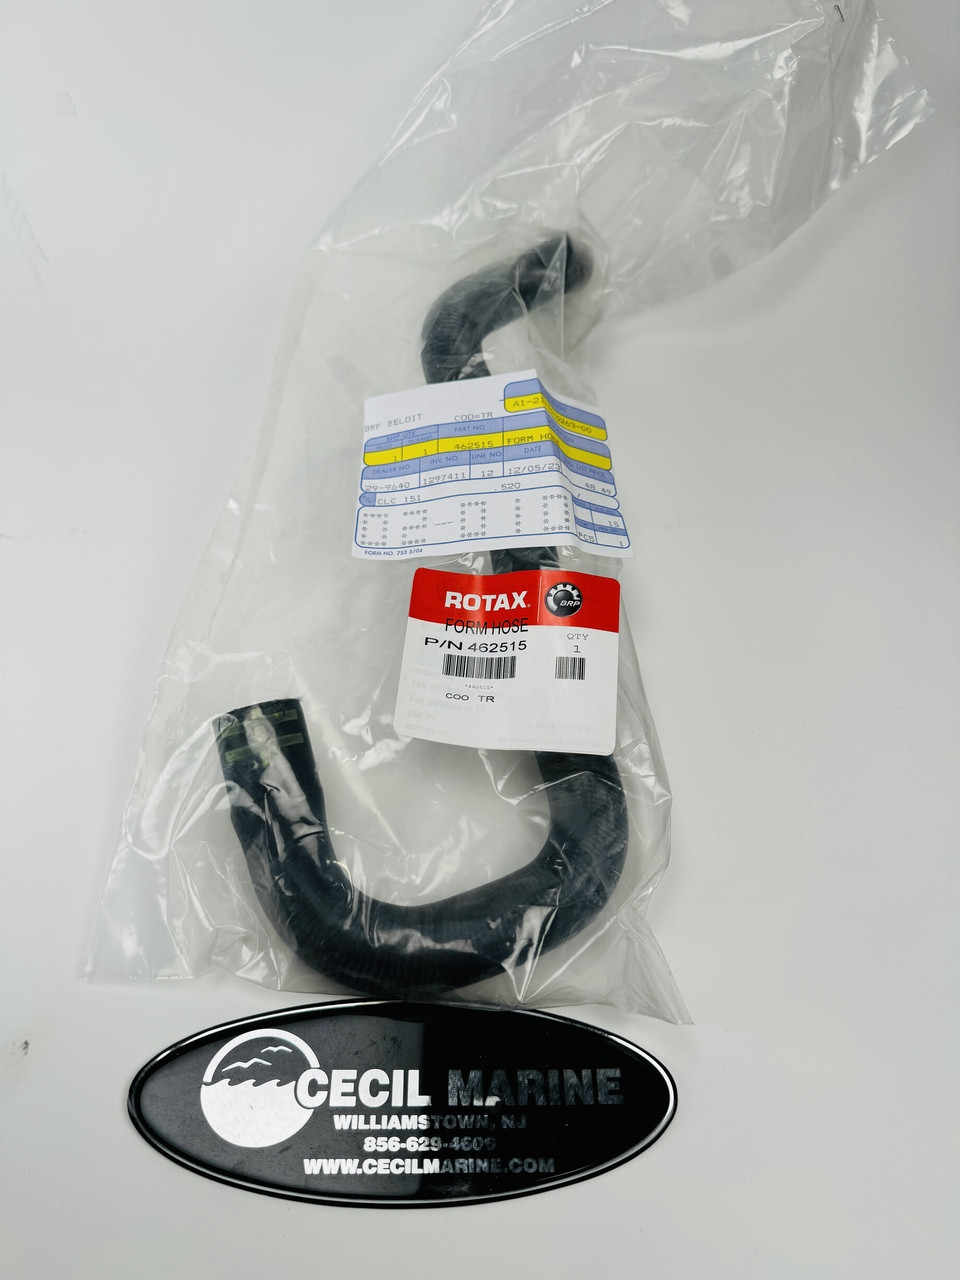 $59.99* GENUINE BRP no tax* HOSE 462515 *In Stock & Ready To Ship!